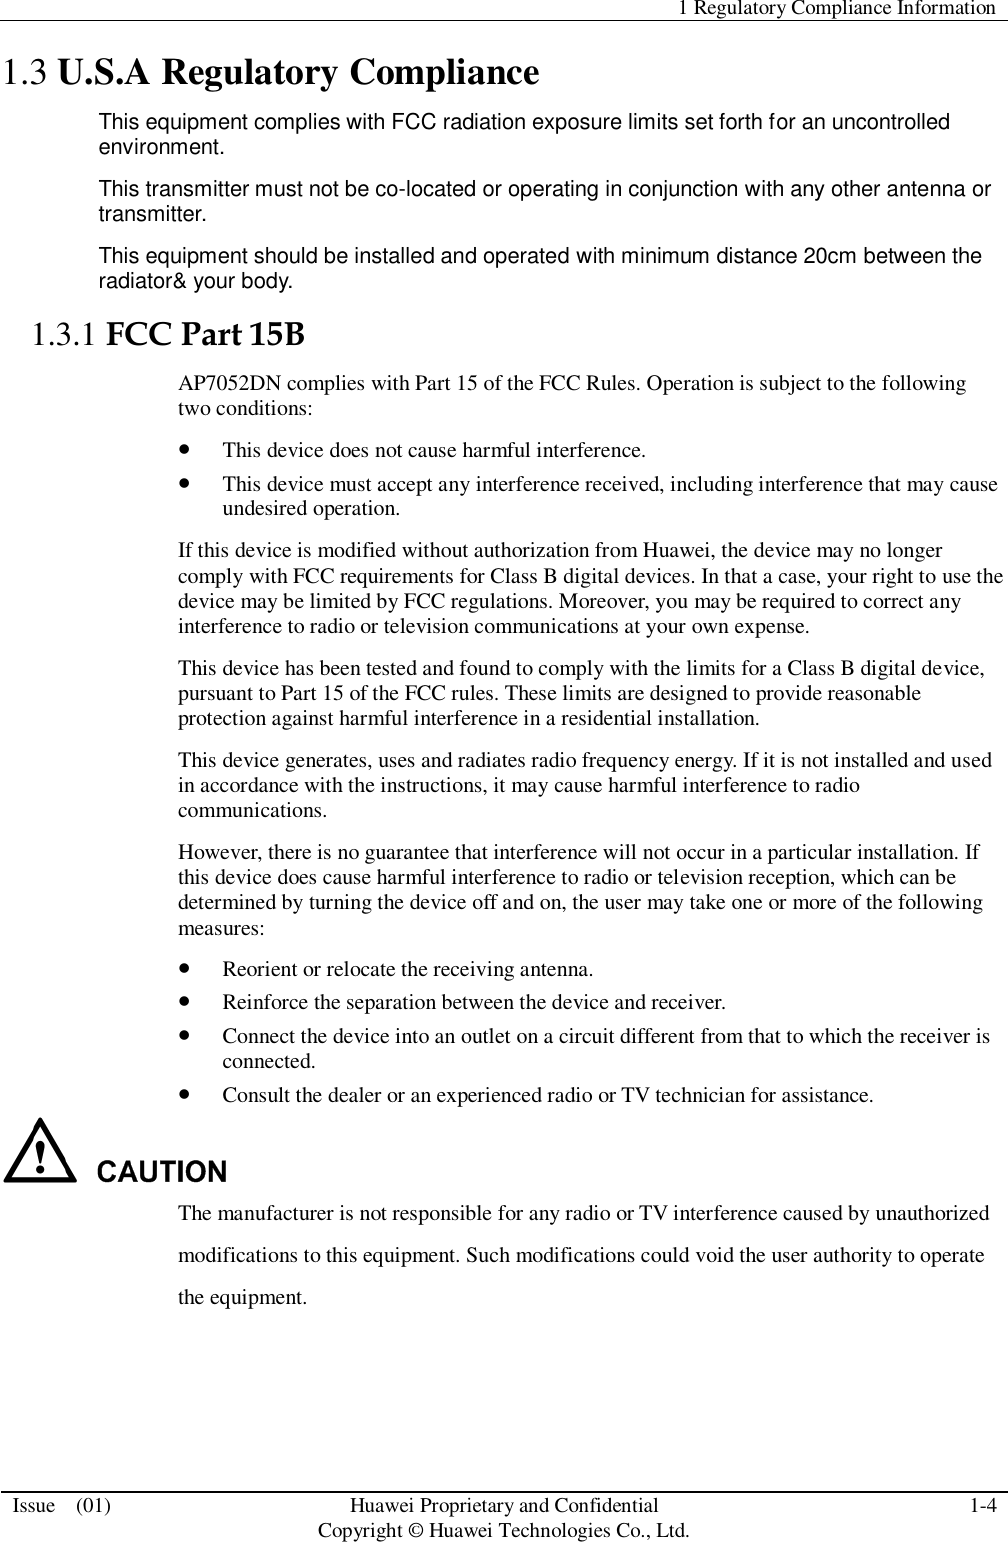   1 Regulatory Compliance Information  Issue    (01) Huawei Proprietary and Confidential                                     Copyright © Huawei Technologies Co., Ltd. 1-4  1.3 U.S.A Regulatory Compliance This equipment complies with FCC radiation exposure limits set forth for an uncontrolled environment. This transmitter must not be co-located or operating in conjunction with any other antenna or transmitter. This equipment should be installed and operated with minimum distance 20cm between the radiator&amp; your body.  1.3.1 FCC Part 15B AP7052DN complies with Part 15 of the FCC Rules. Operation is subject to the following two conditions:  This device does not cause harmful interference.  This device must accept any interference received, including interference that may cause undesired operation. If this device is modified without authorization from Huawei, the device may no longer comply with FCC requirements for Class B digital devices. In that a case, your right to use the device may be limited by FCC regulations. Moreover, you may be required to correct any interference to radio or television communications at your own expense. This device has been tested and found to comply with the limits for a Class B digital device, pursuant to Part 15 of the FCC rules. These limits are designed to provide reasonable protection against harmful interference in a residential installation. This device generates, uses and radiates radio frequency energy. If it is not installed and used in accordance with the instructions, it may cause harmful interference to radio communications. However, there is no guarantee that interference will not occur in a particular installation. If this device does cause harmful interference to radio or television reception, which can be determined by turning the device off and on, the user may take one or more of the following measures:  Reorient or relocate the receiving antenna.  Reinforce the separation between the device and receiver.  Connect the device into an outlet on a circuit different from that to which the receiver is connected.  Consult the dealer or an experienced radio or TV technician for assistance.  The manufacturer is not responsible for any radio or TV interference caused by unauthorized modifications to this equipment. Such modifications could void the user authority to operate the equipment. 